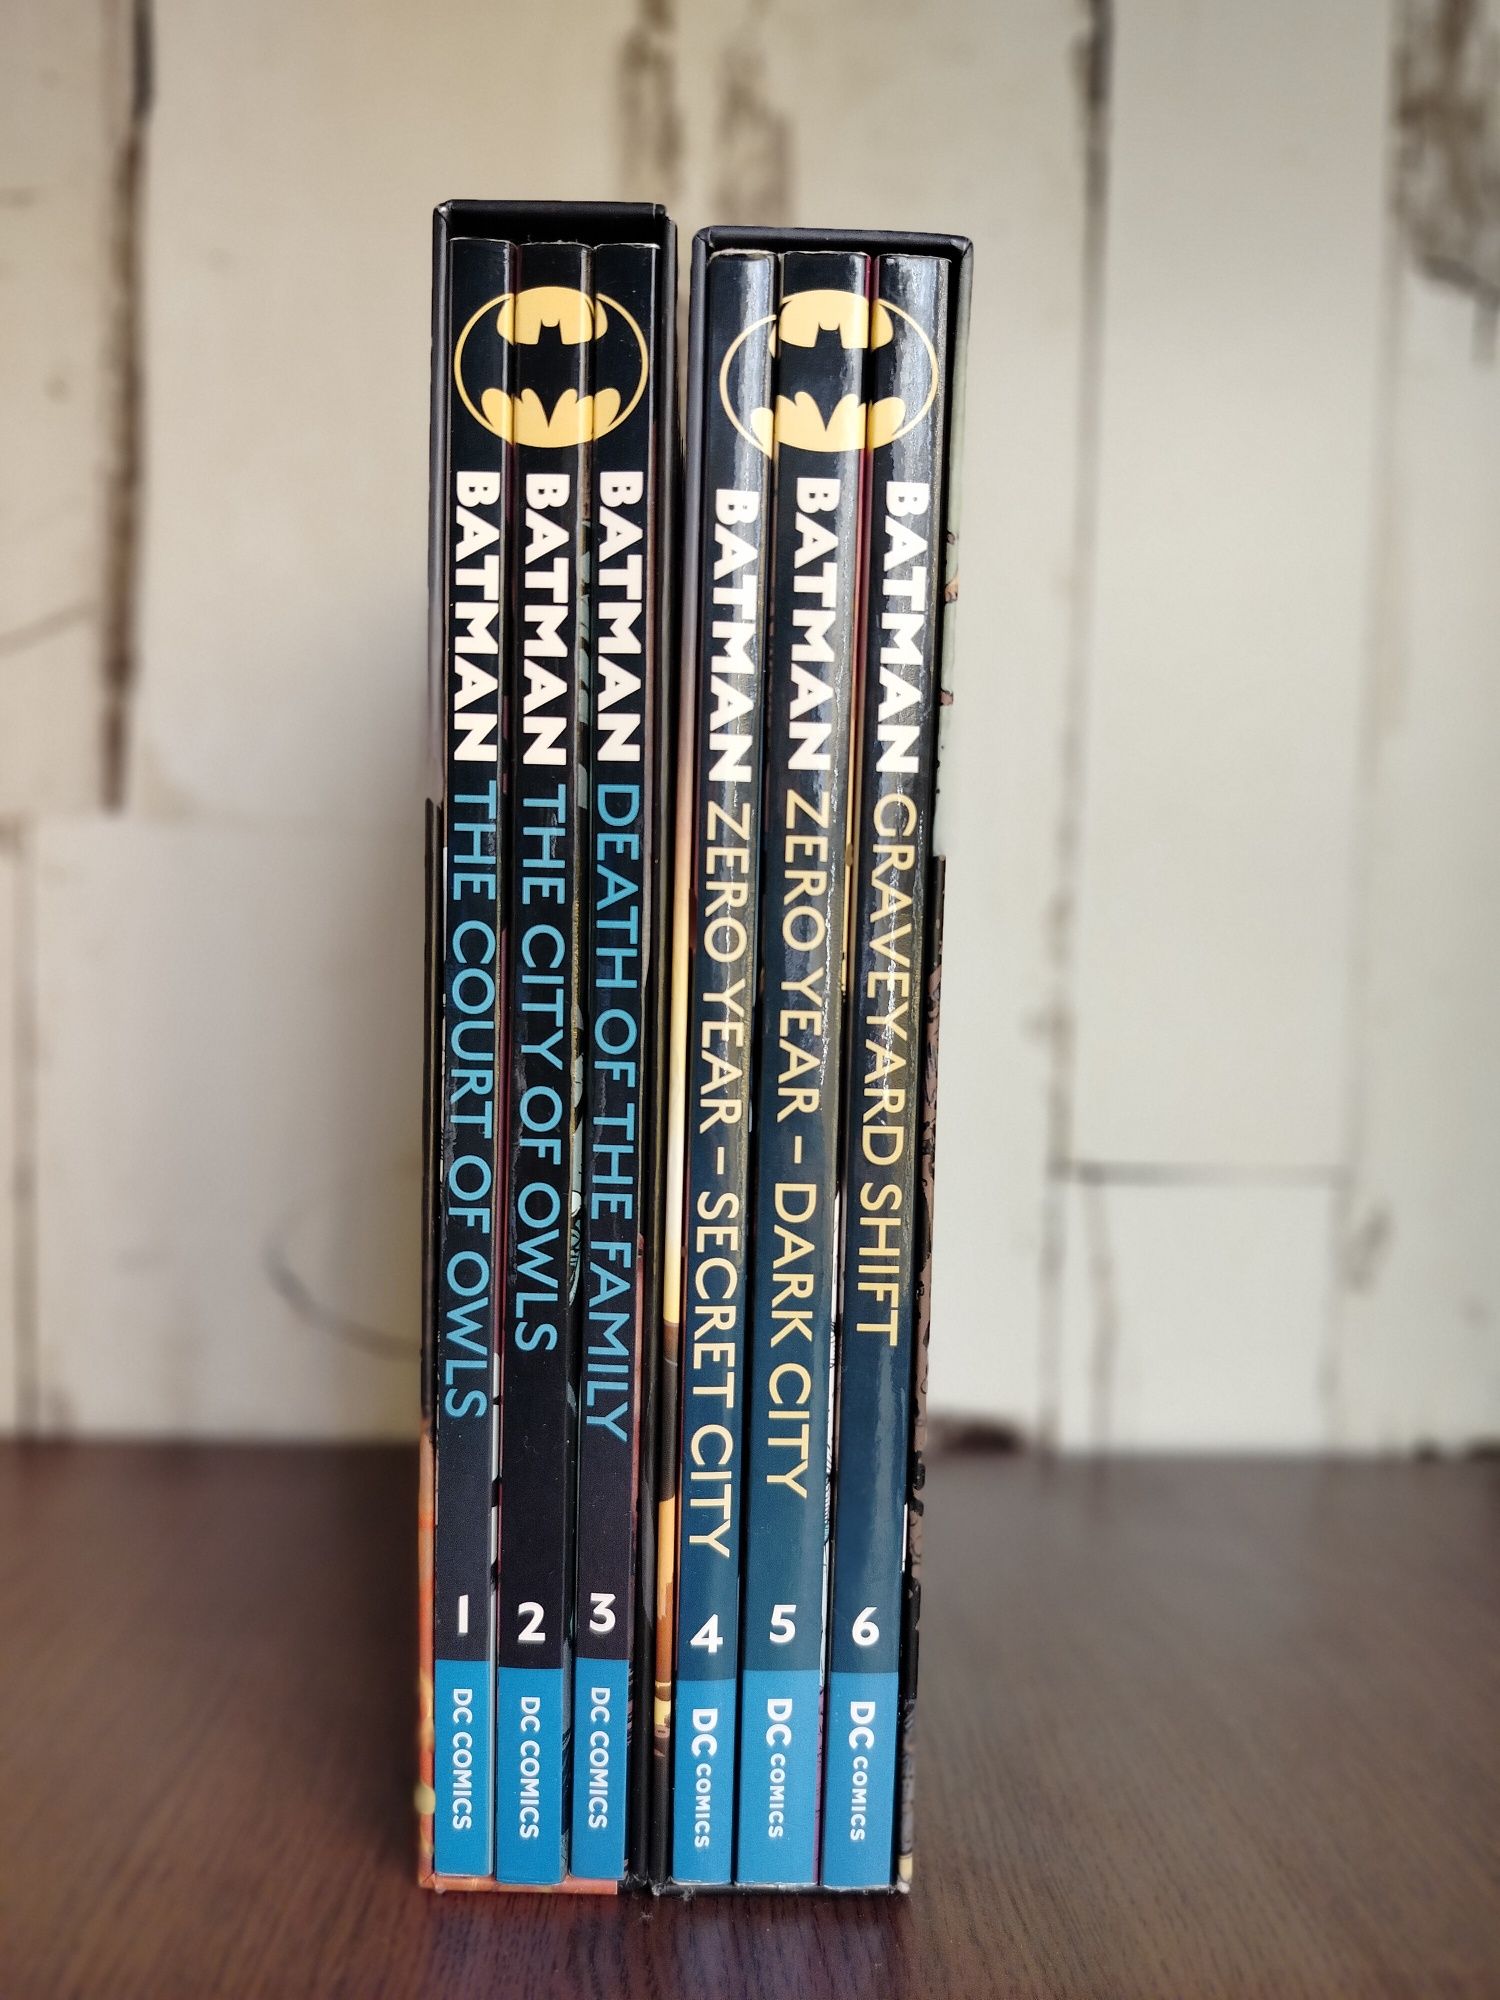 BATMAN by Scott Snyder and Greg Capullo Box Set 1 and 2